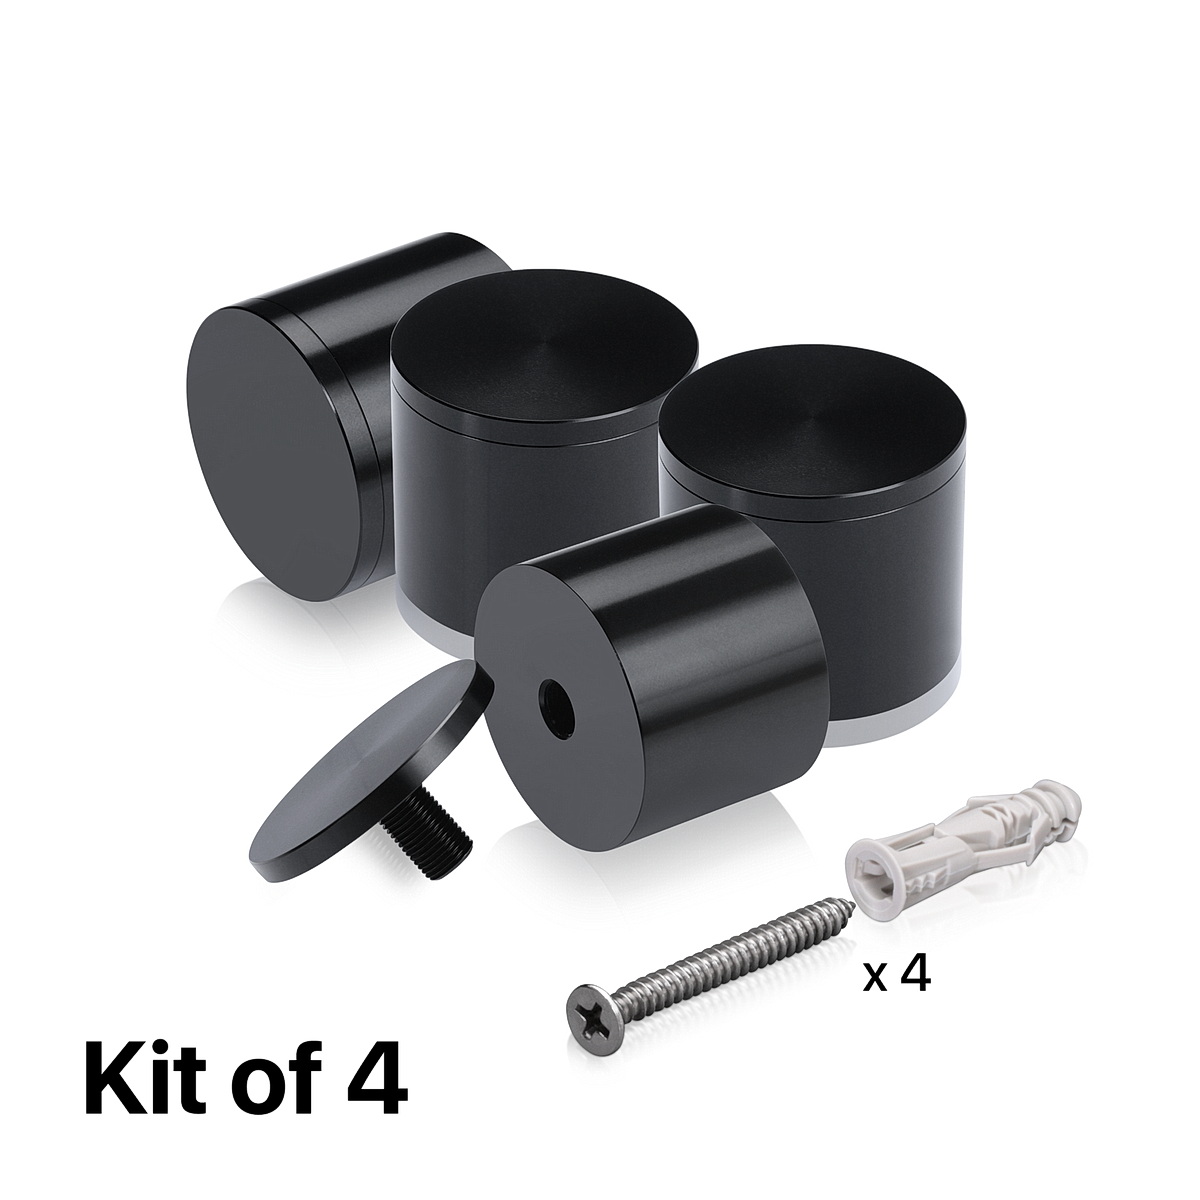 (Set of 4) 2'' Diameter X 1-1/2'' Barrel Length, Affordable Aluminum Standoffs, Black Anodized Finish Standoff and (4) 2216Z Screws and (4) LANC1 Anchors for concrete/drywall (For Inside/Outside) [Required Material Hole Size: 7/16'']